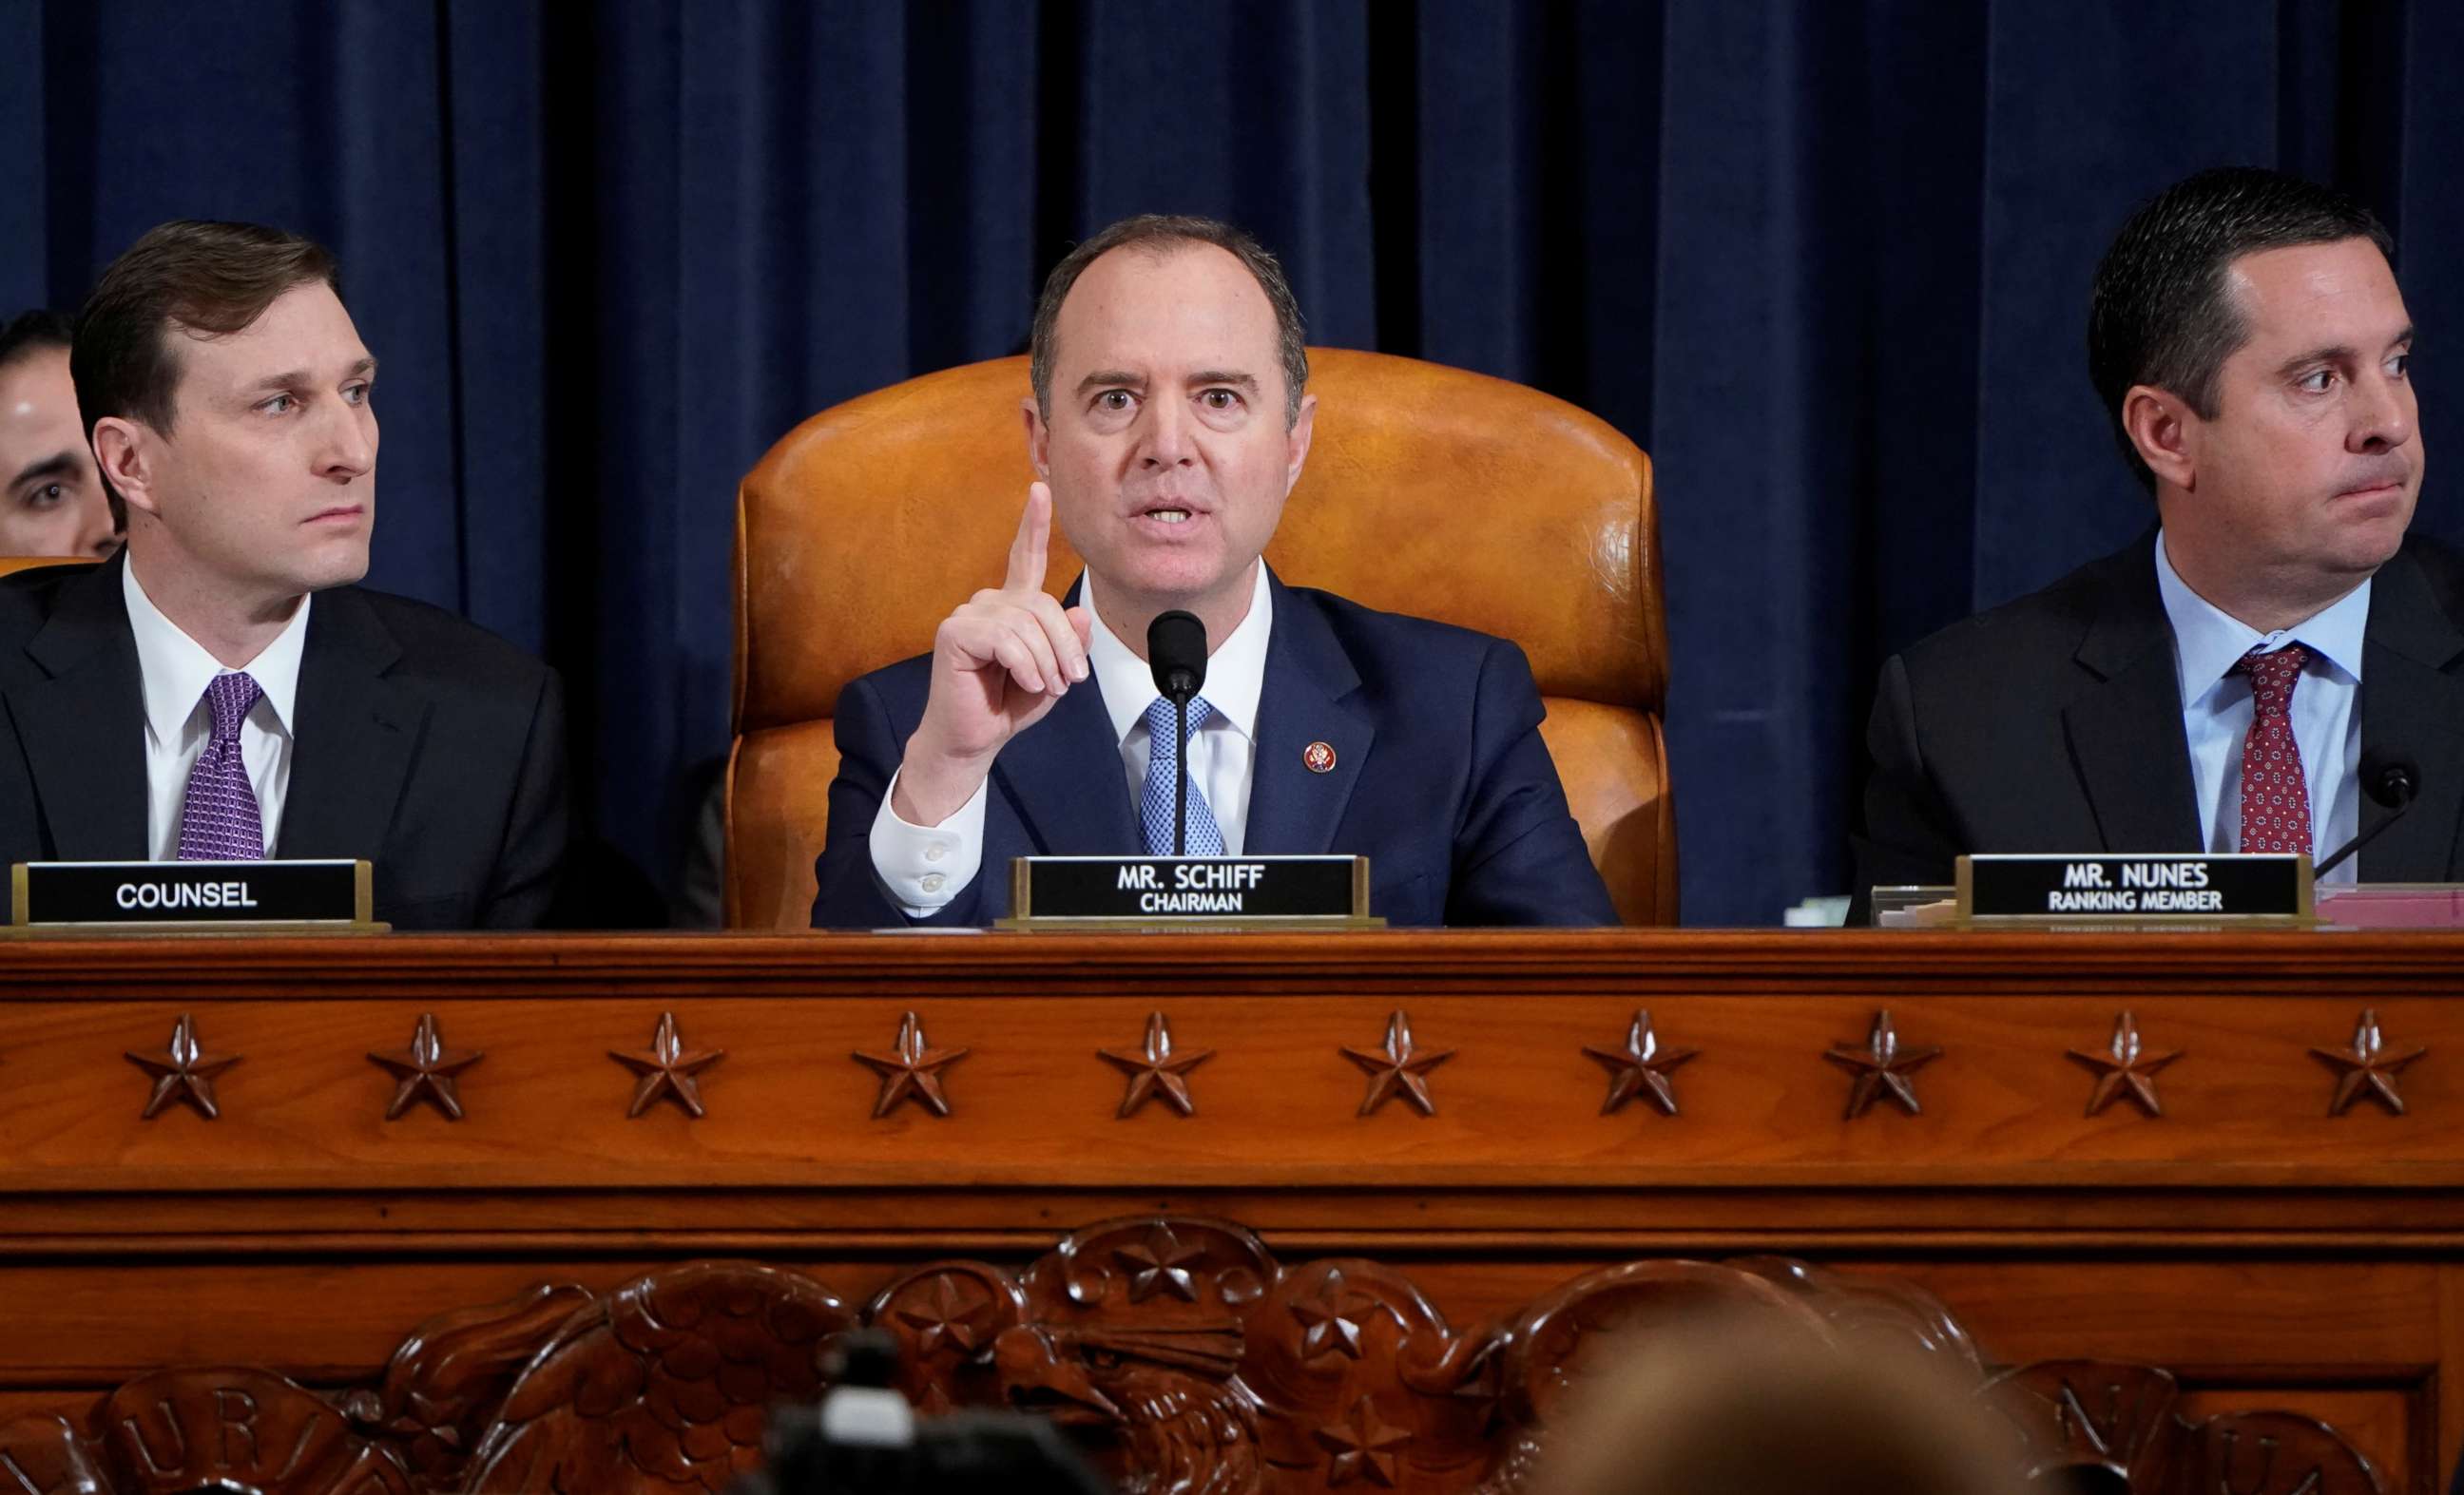 PHOTO: House Intelligence Chairman Adam Schiff speaks during the House Intelligence Committee hearing with witness Marie Yovanovitch, as part of the impeachment inquiry into President Donald Trump on Capitol Hill in Washington, Nov. 15, 2019.